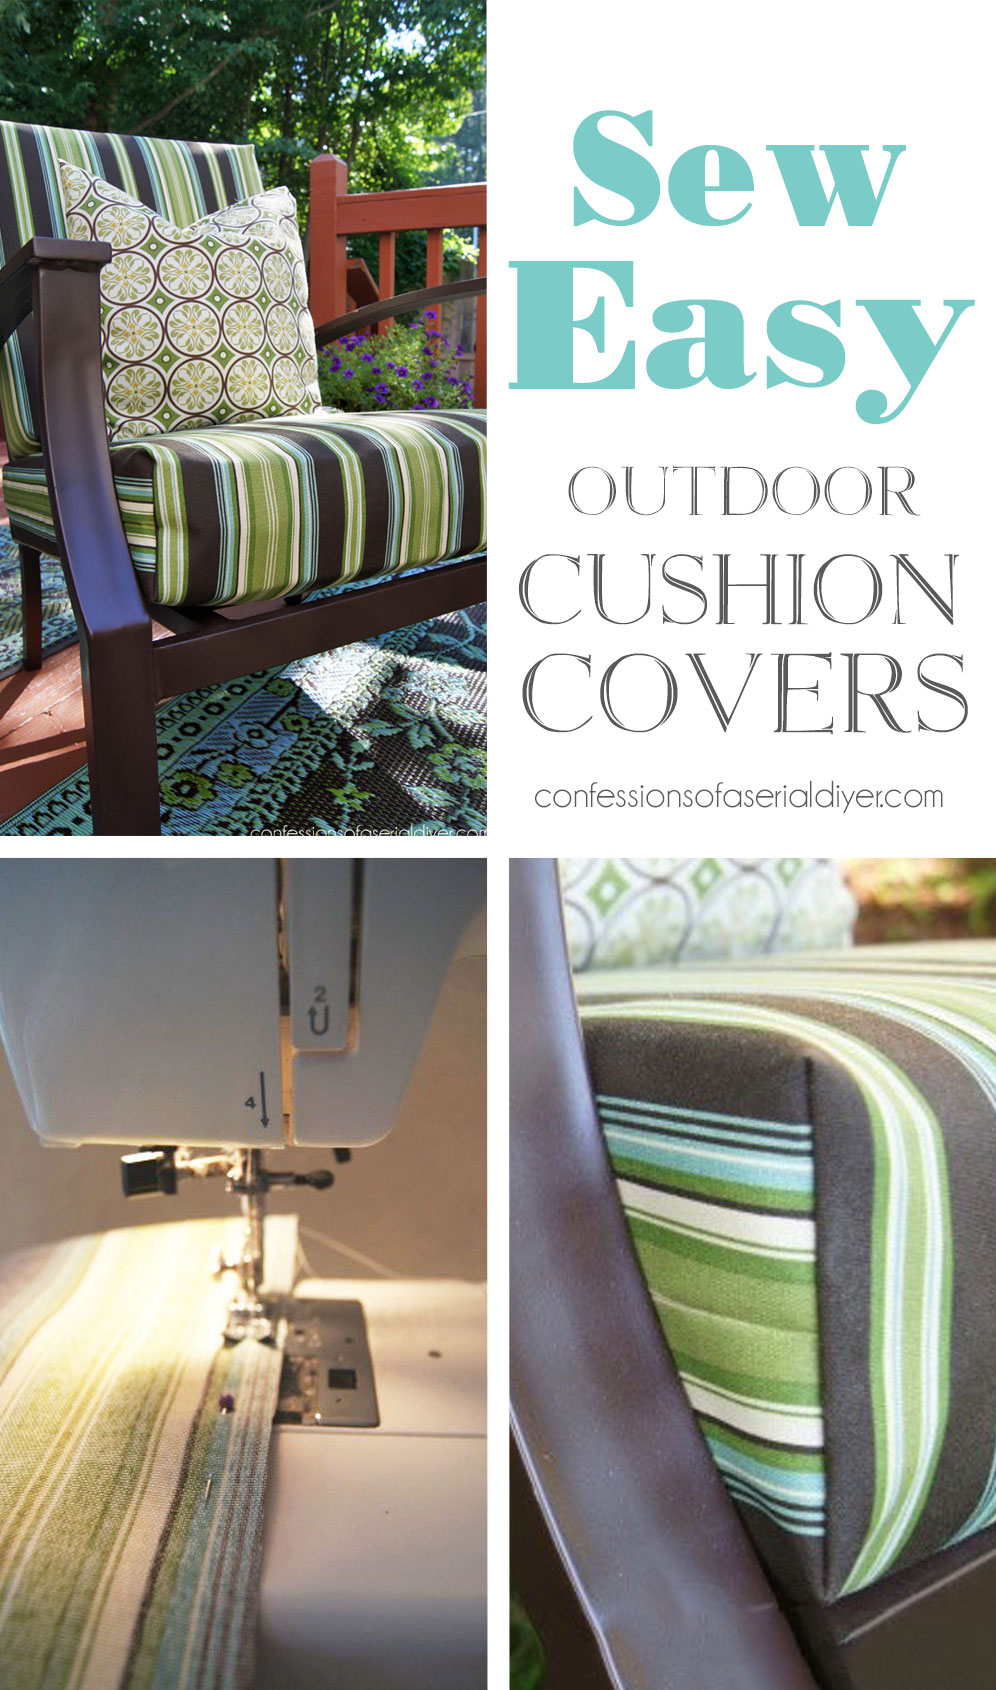 Sew Easy Outdoor Cushion Covers, Diy Replacement Covers For Outdoor Cushions